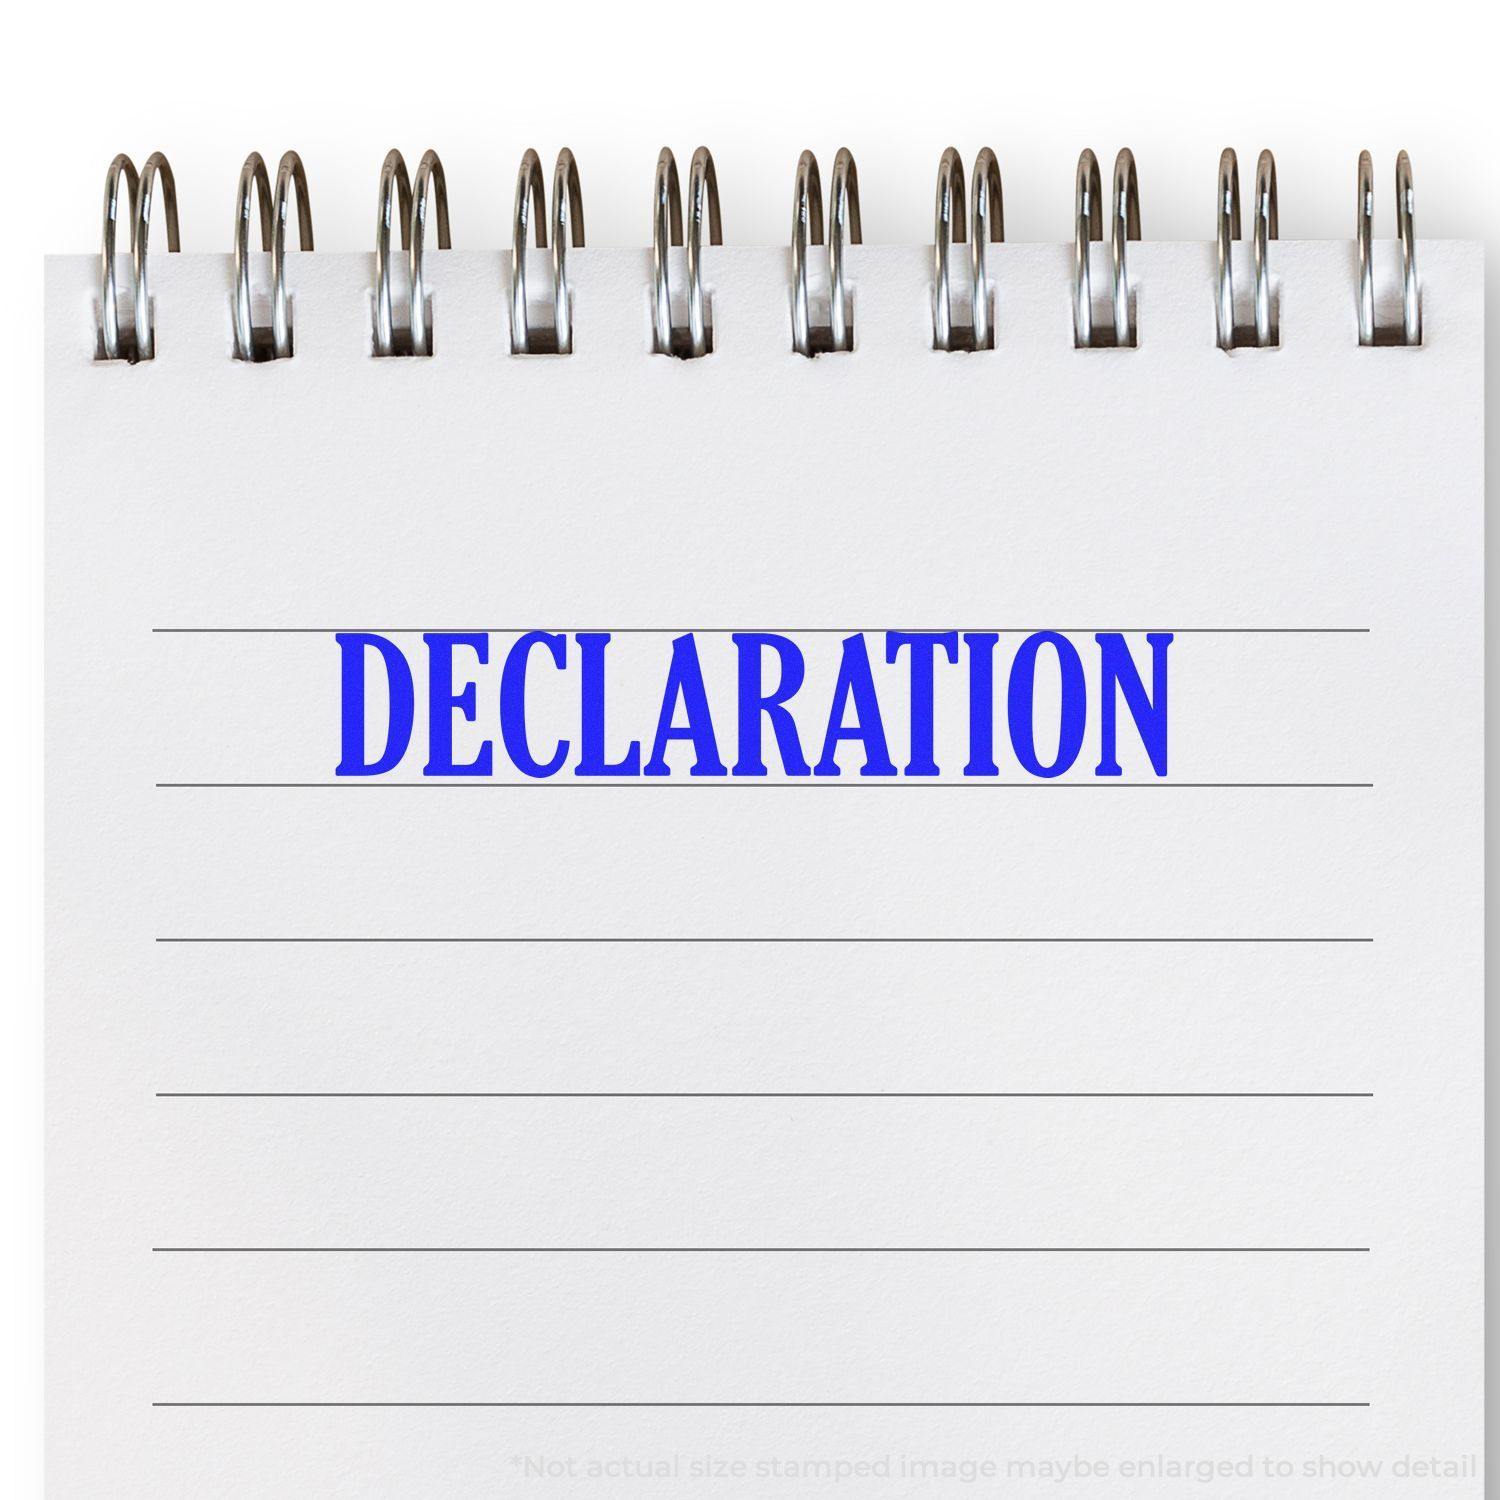 A self-inking stamp with a stamped image showing how the text "DECLARATION" in a large bold font is displayed by it.